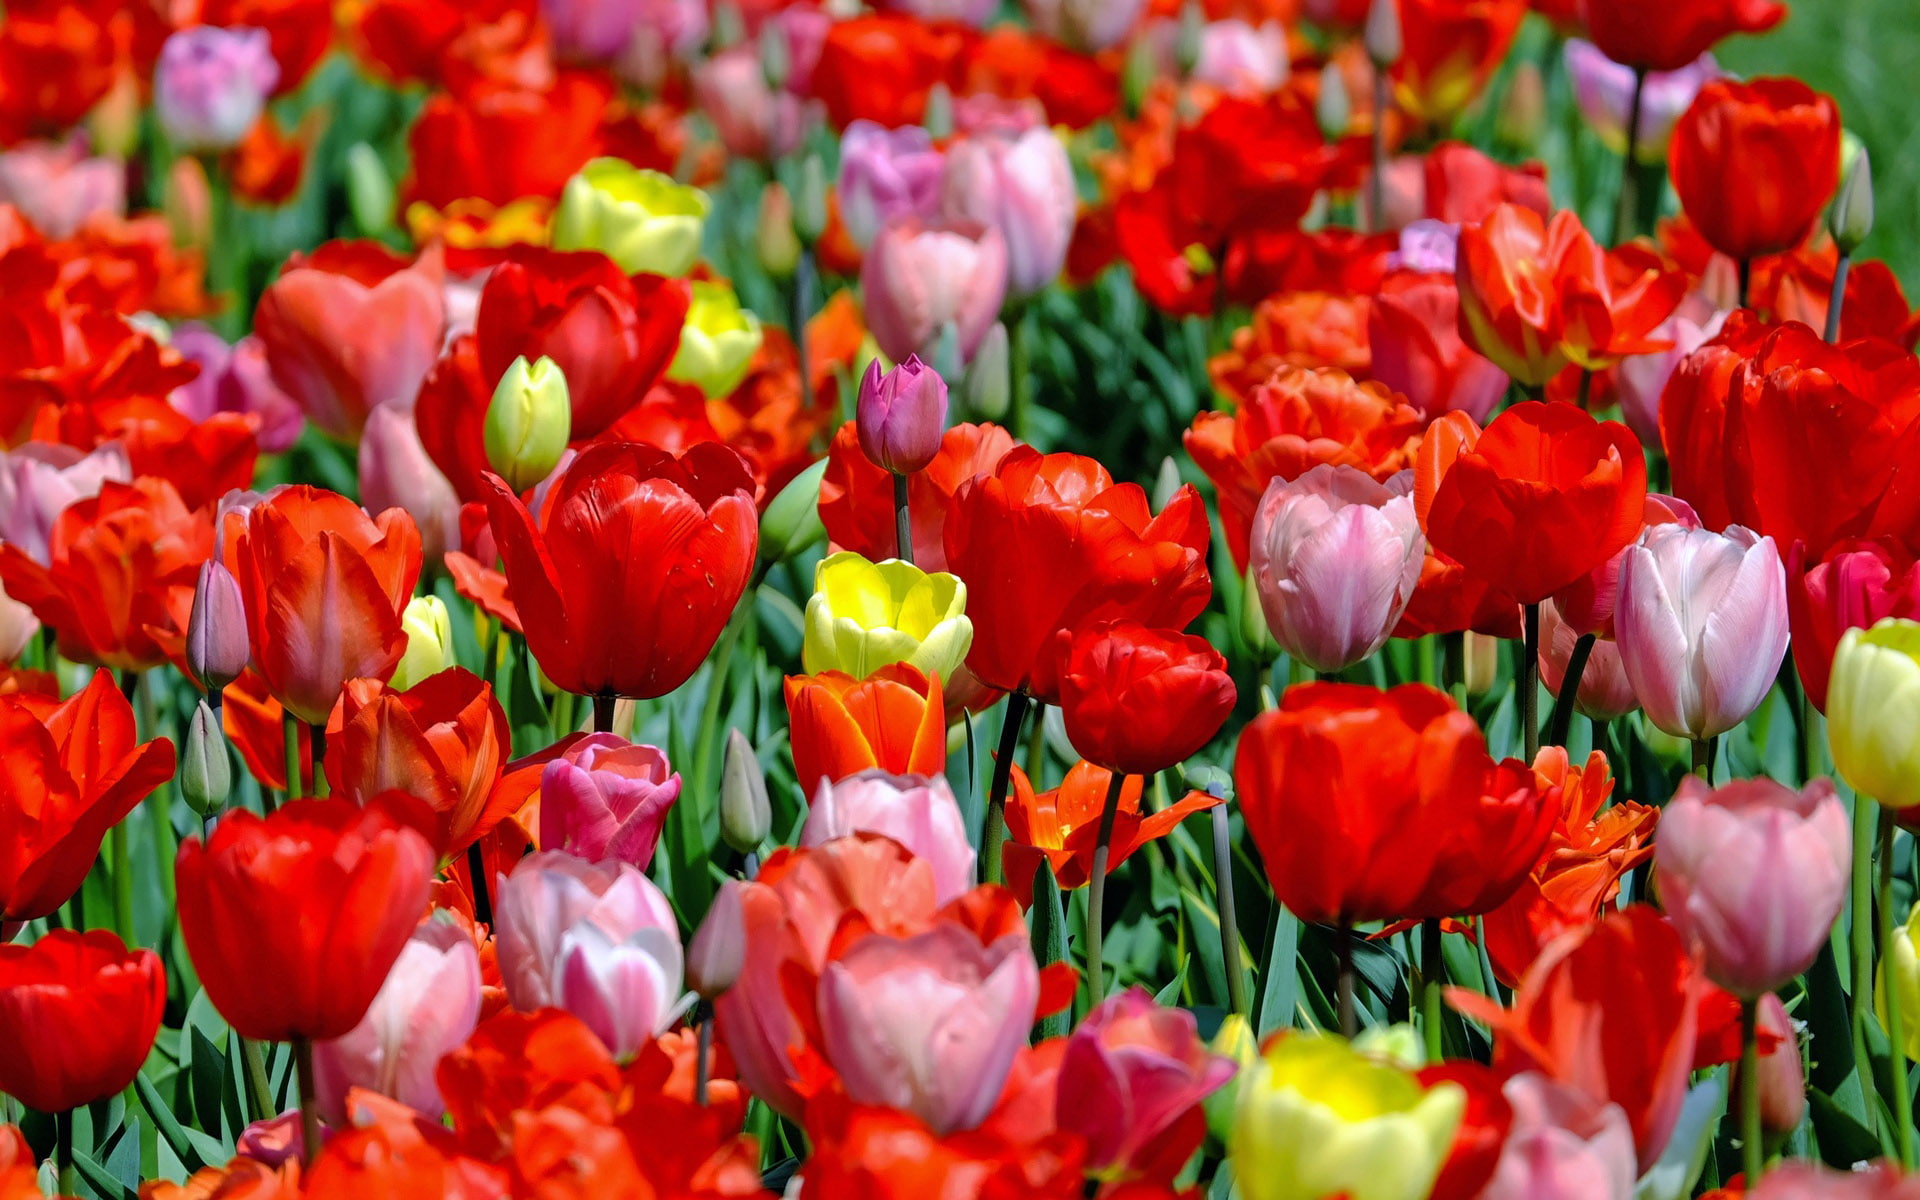 Sold Flowers Tulips Flowers With Red Yellow And Pink Color Desktop Wallpaper Hd 1920×1200